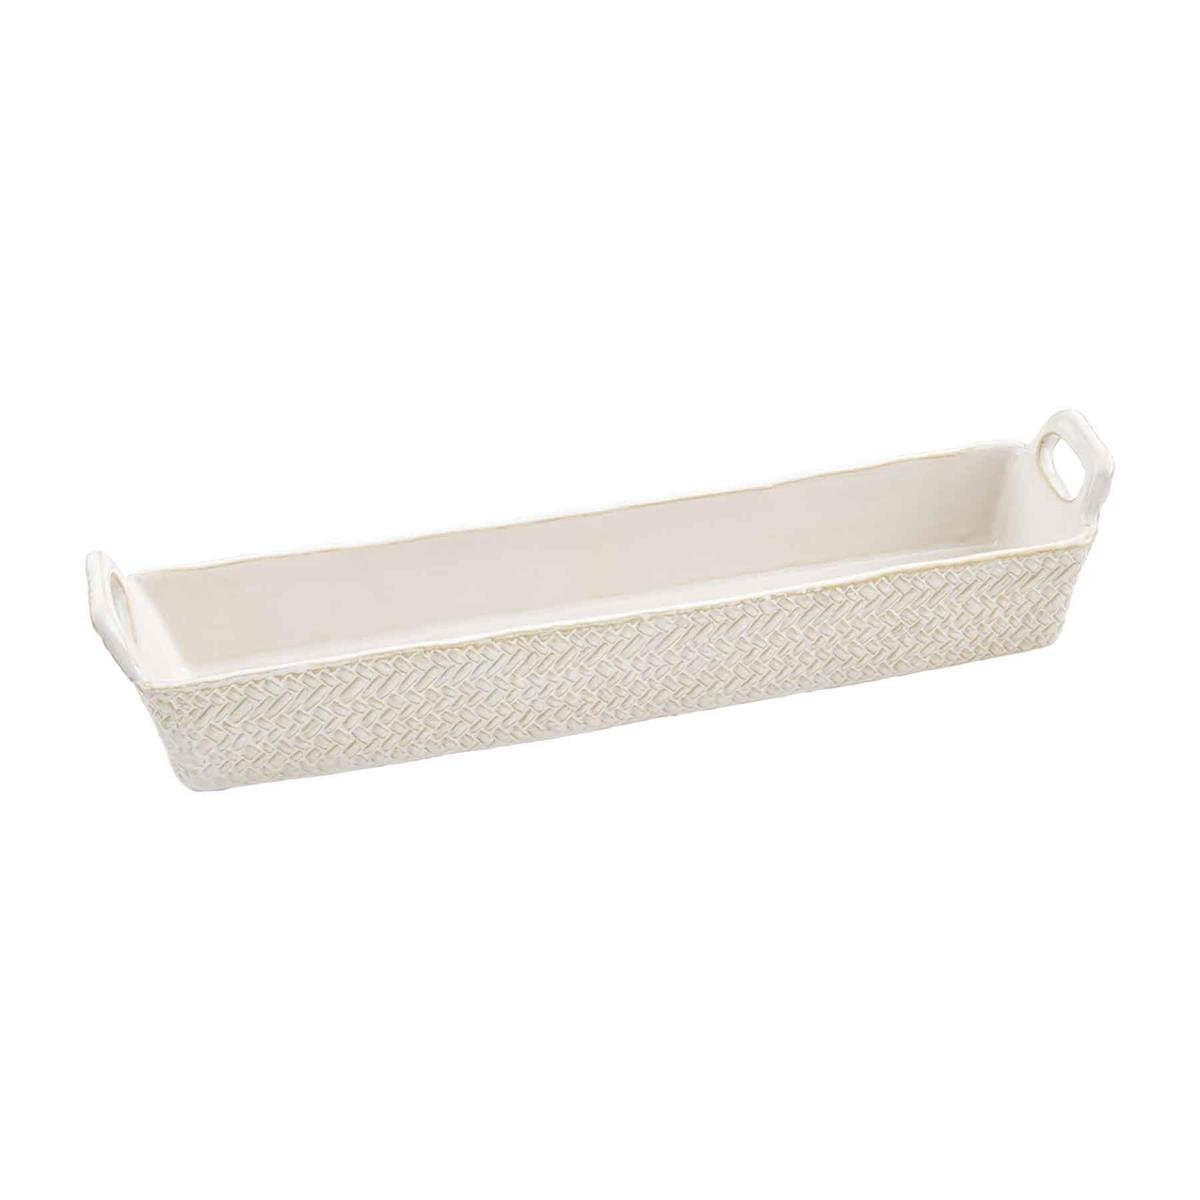 43810 - Small Textured Cracker Tray - $36- Received